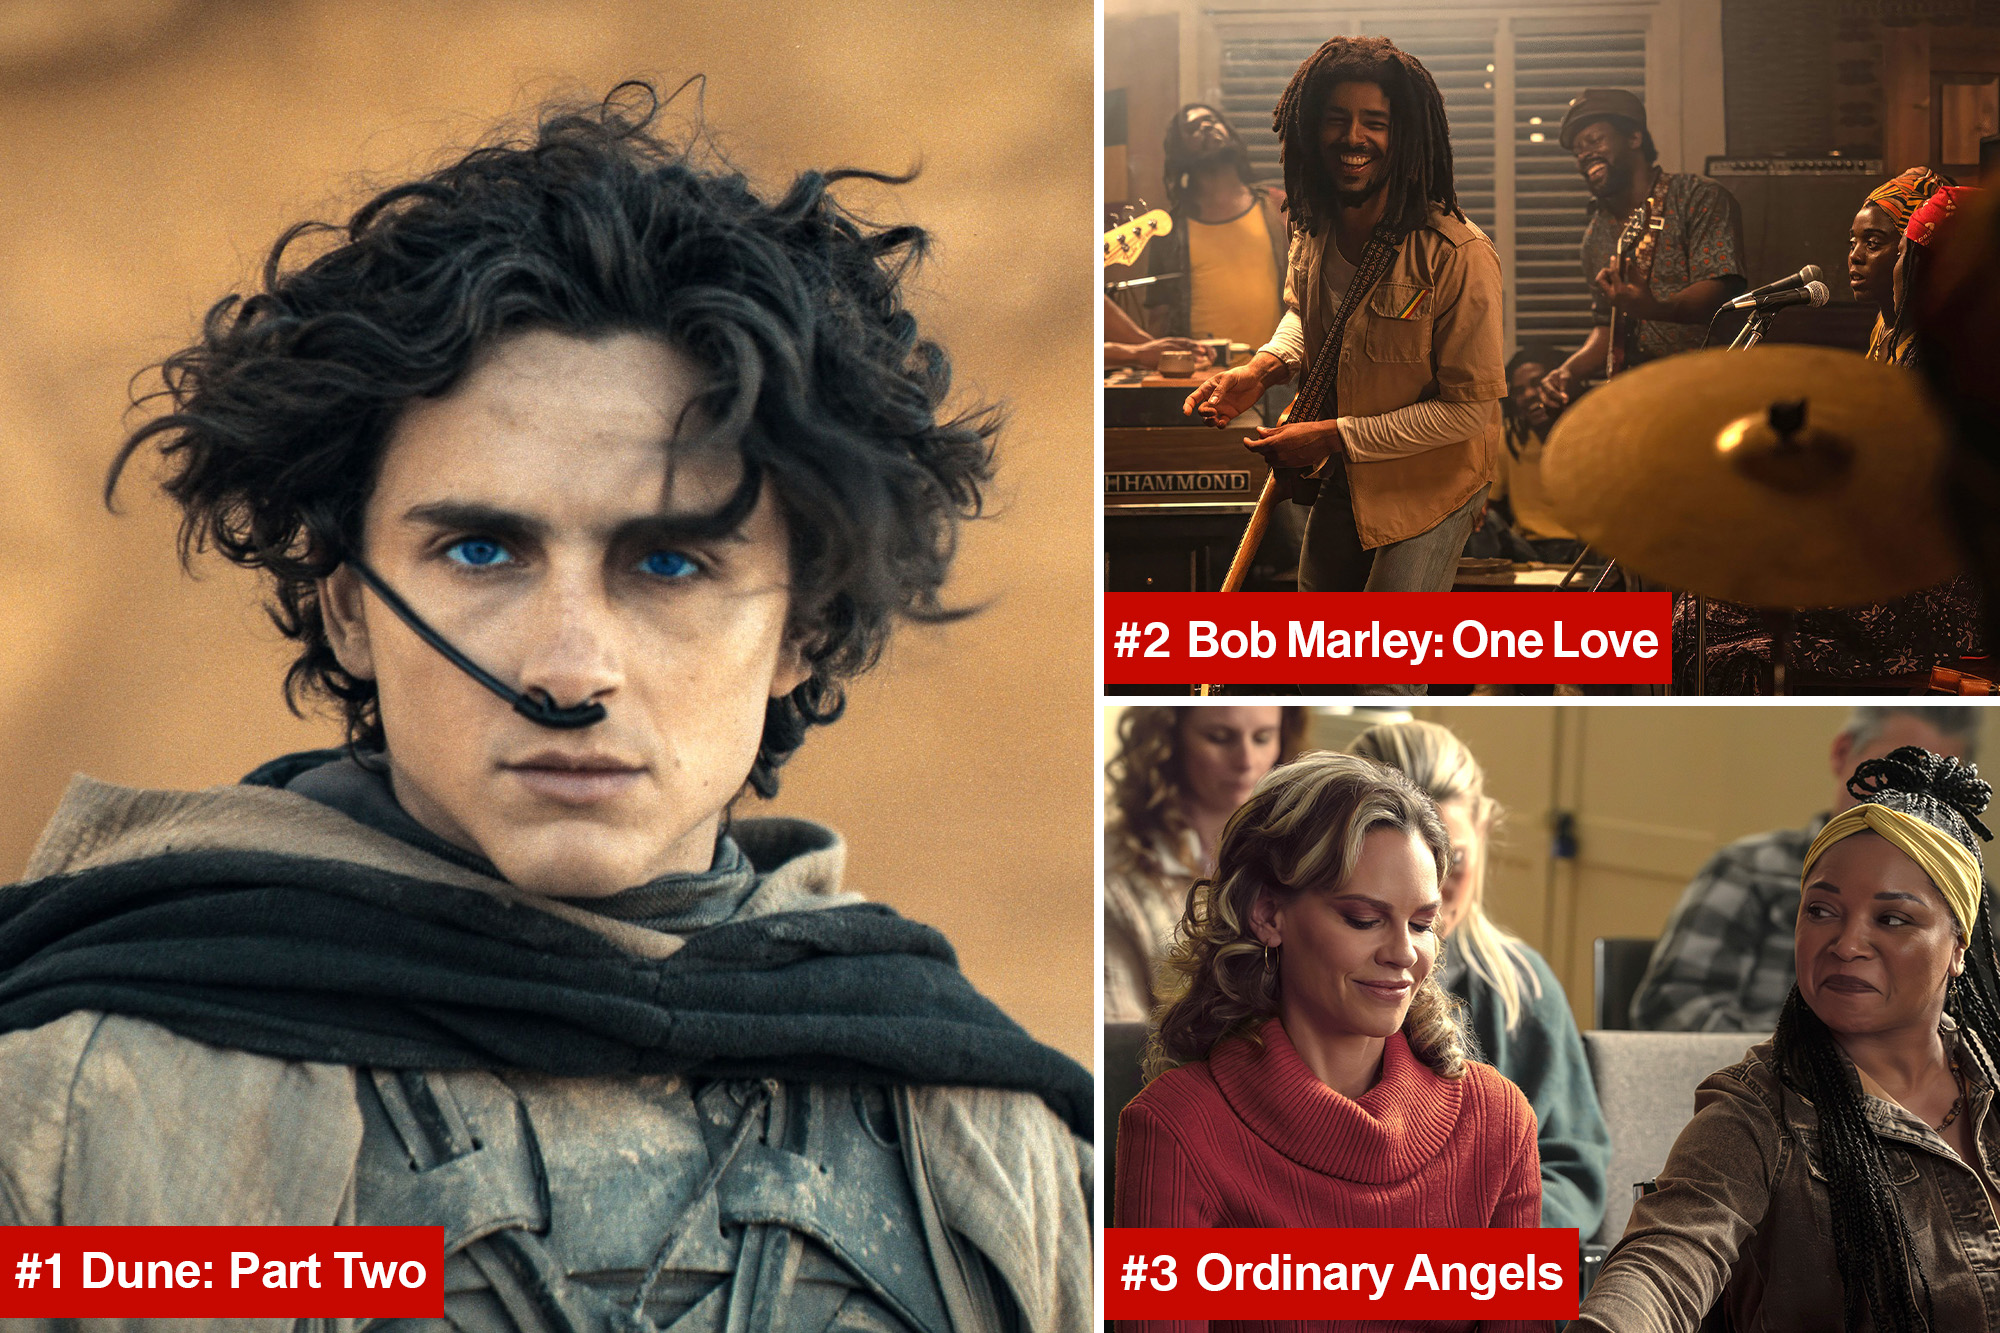 Dune: Part Two, Bob Marley: One Love, Ordinary Angels